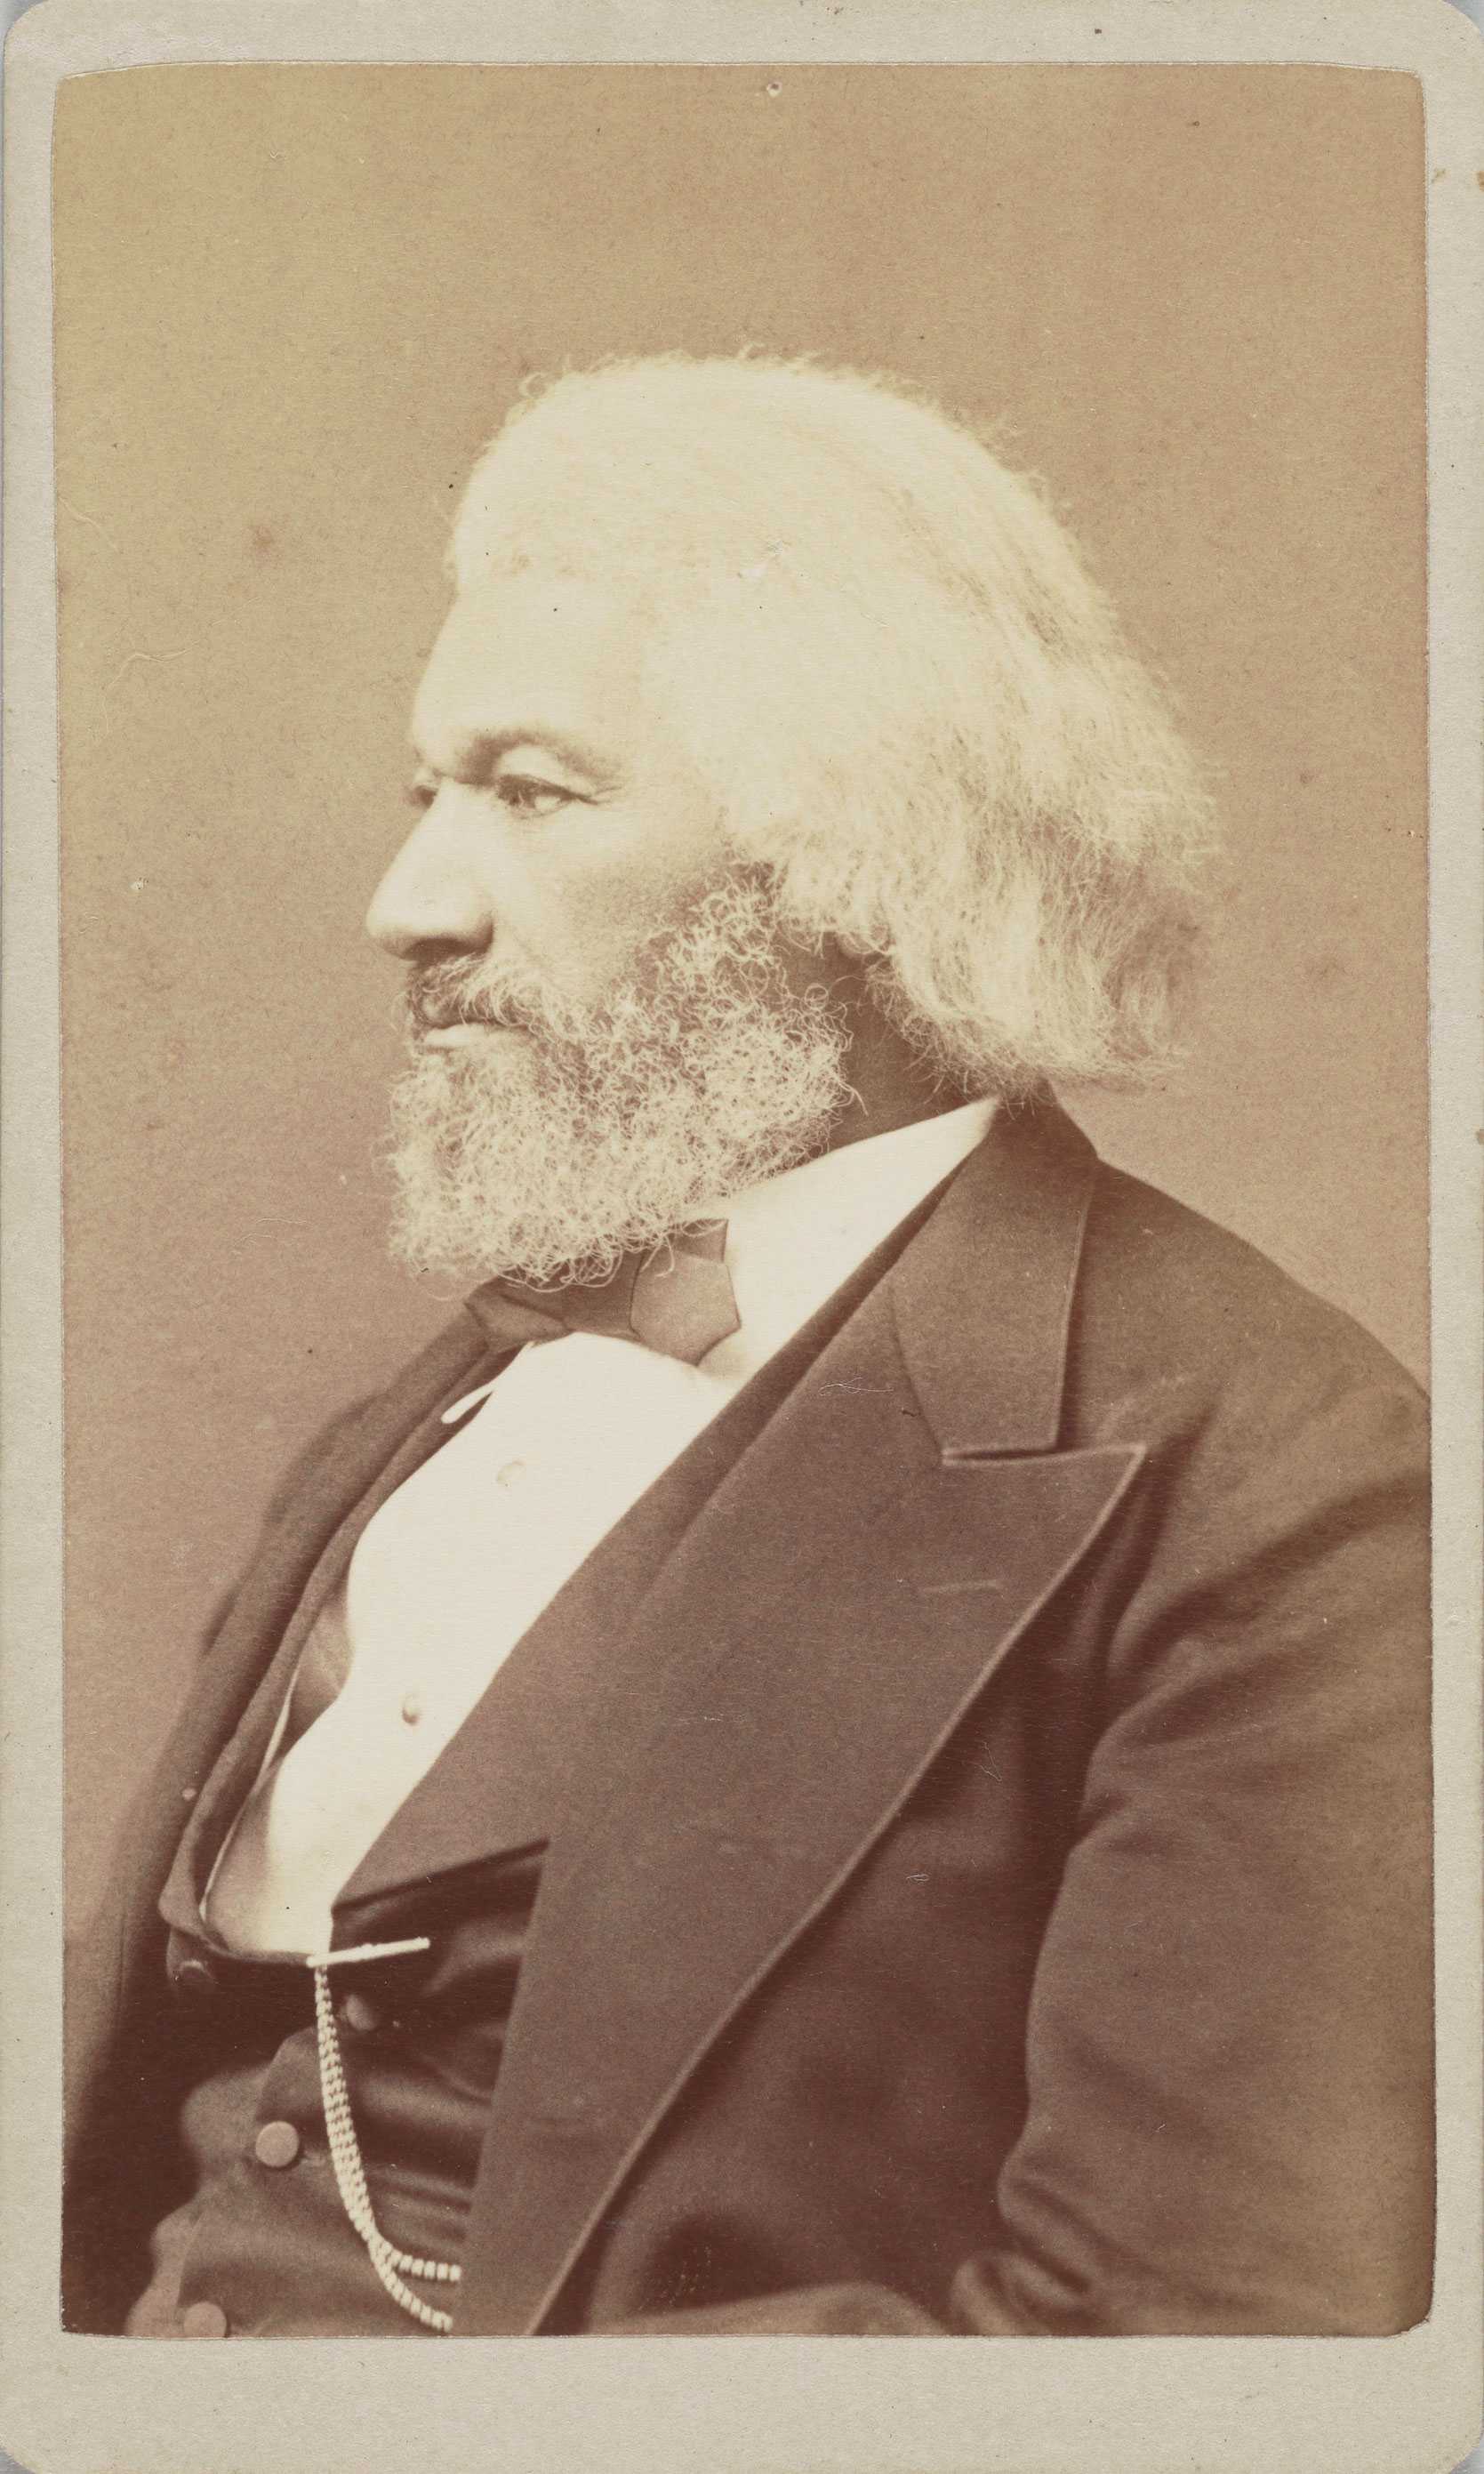 A carte-de-visite albumen print portrait of Frederick Douglass. Douglass sits in profile facing viewer's left wearing bowtie, jacket, and waistcoat. A watch chain hangs from the lapel of his waistcoat. The back of the card features the photographer's stamp. Stamp reads [Fassett / Artist Photographer, / 925 PENNA. AVENUE, / WASHINGTON, / D.C.]